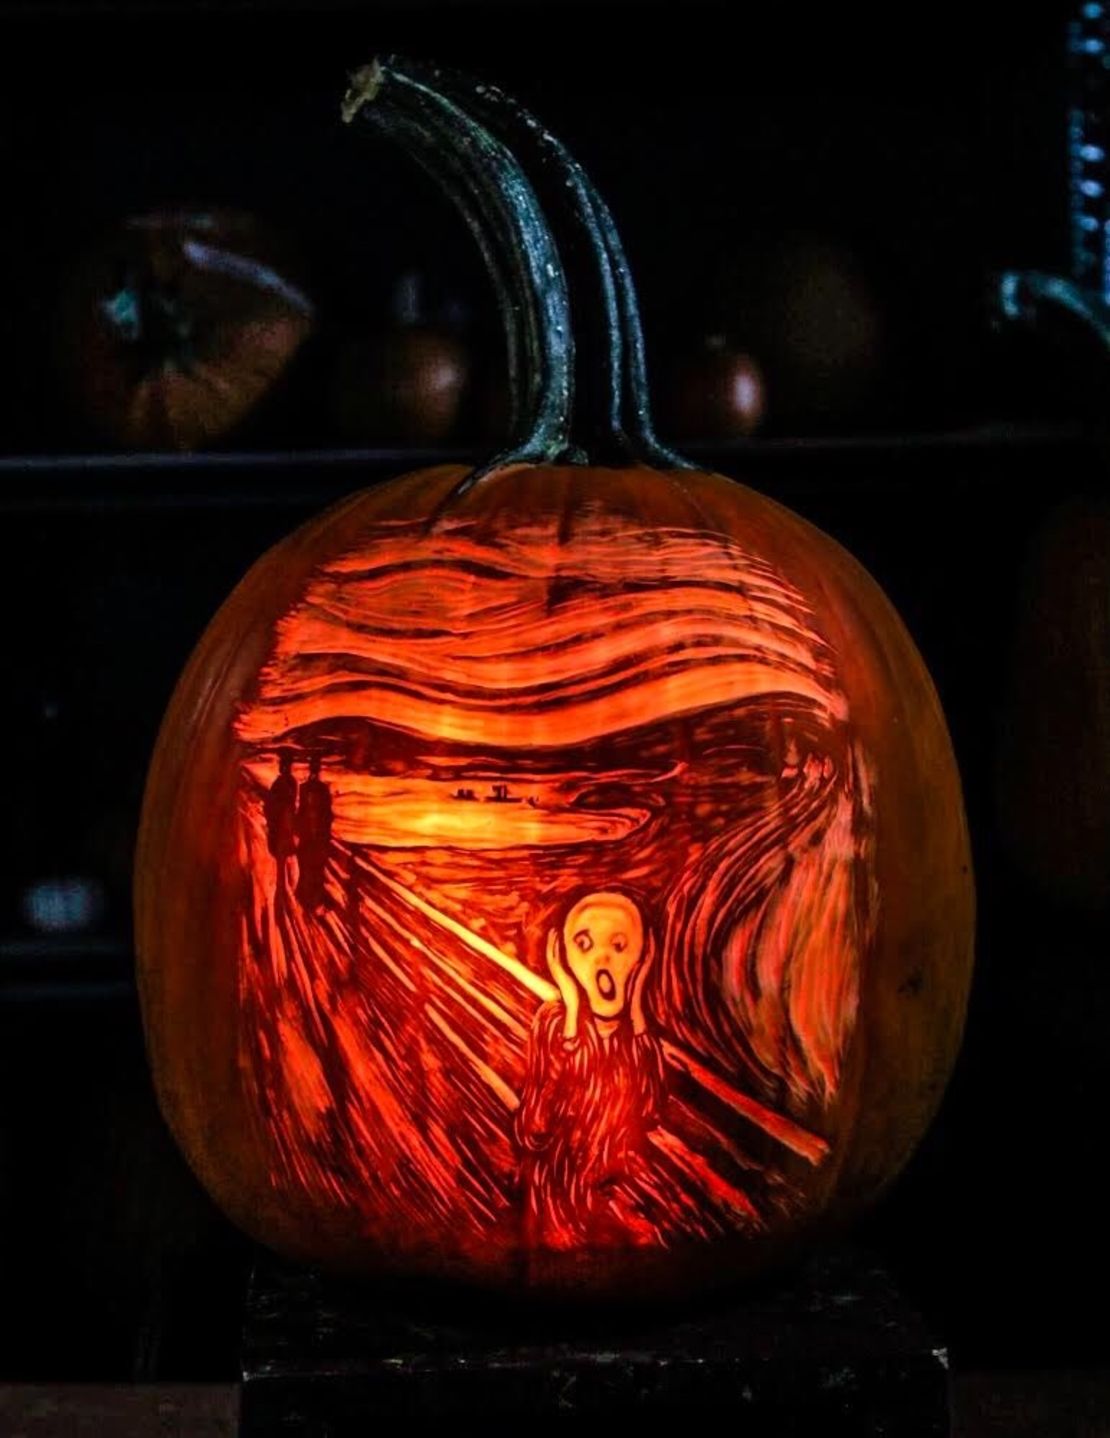 Pumpkin carving inspired by "The Scream" (1893) by Edvard Munch.